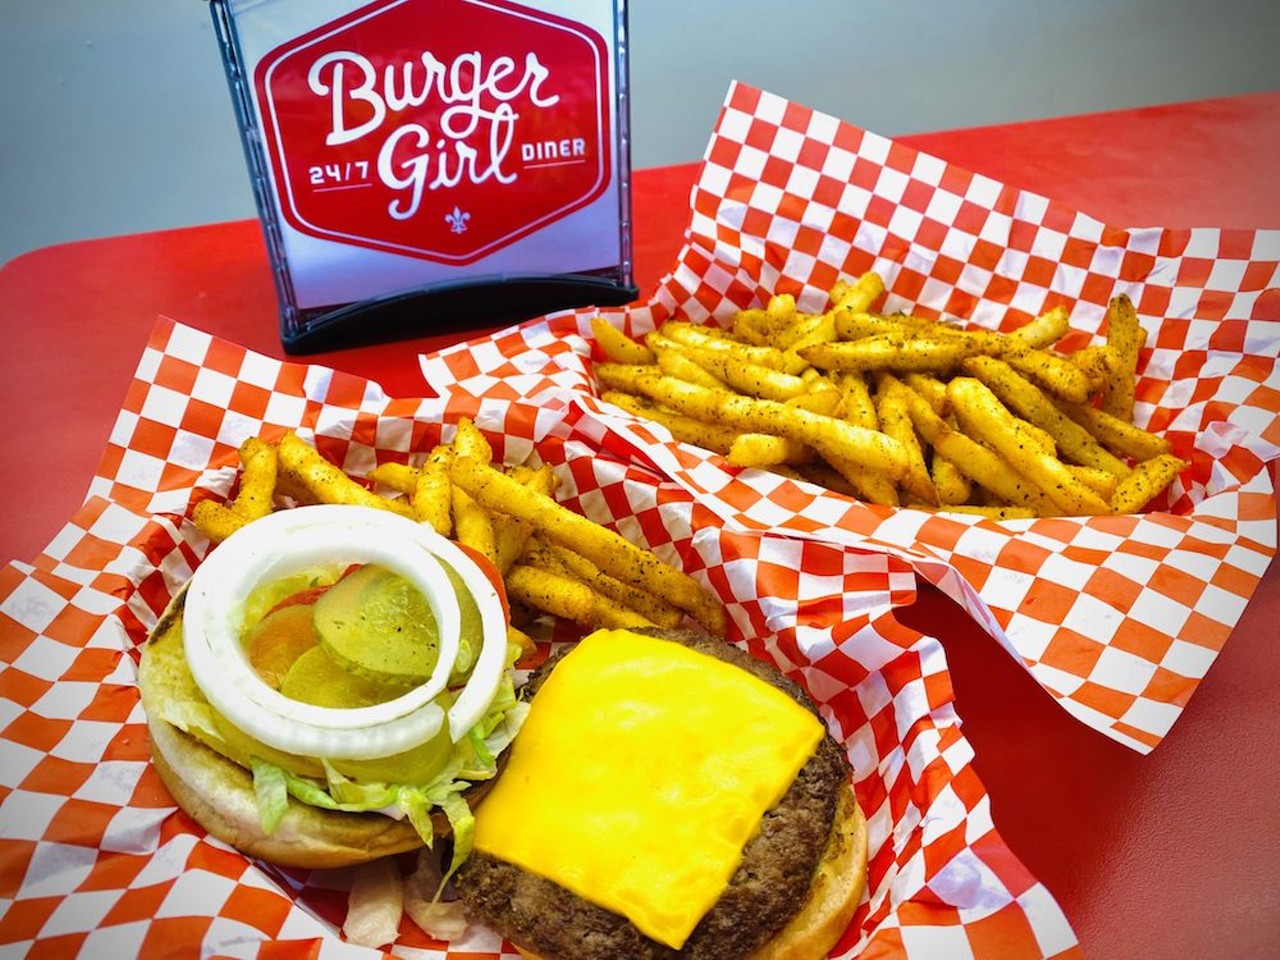 Burger Girl Diner
Burger Girl Burger
Our signature fresh quarter pound 80/20 black angus patty, with your choice of cheese, fully dressed to your liking, with special sauce, on a toasted honey bun. Served with a small order of our perfectly seasoned fries.